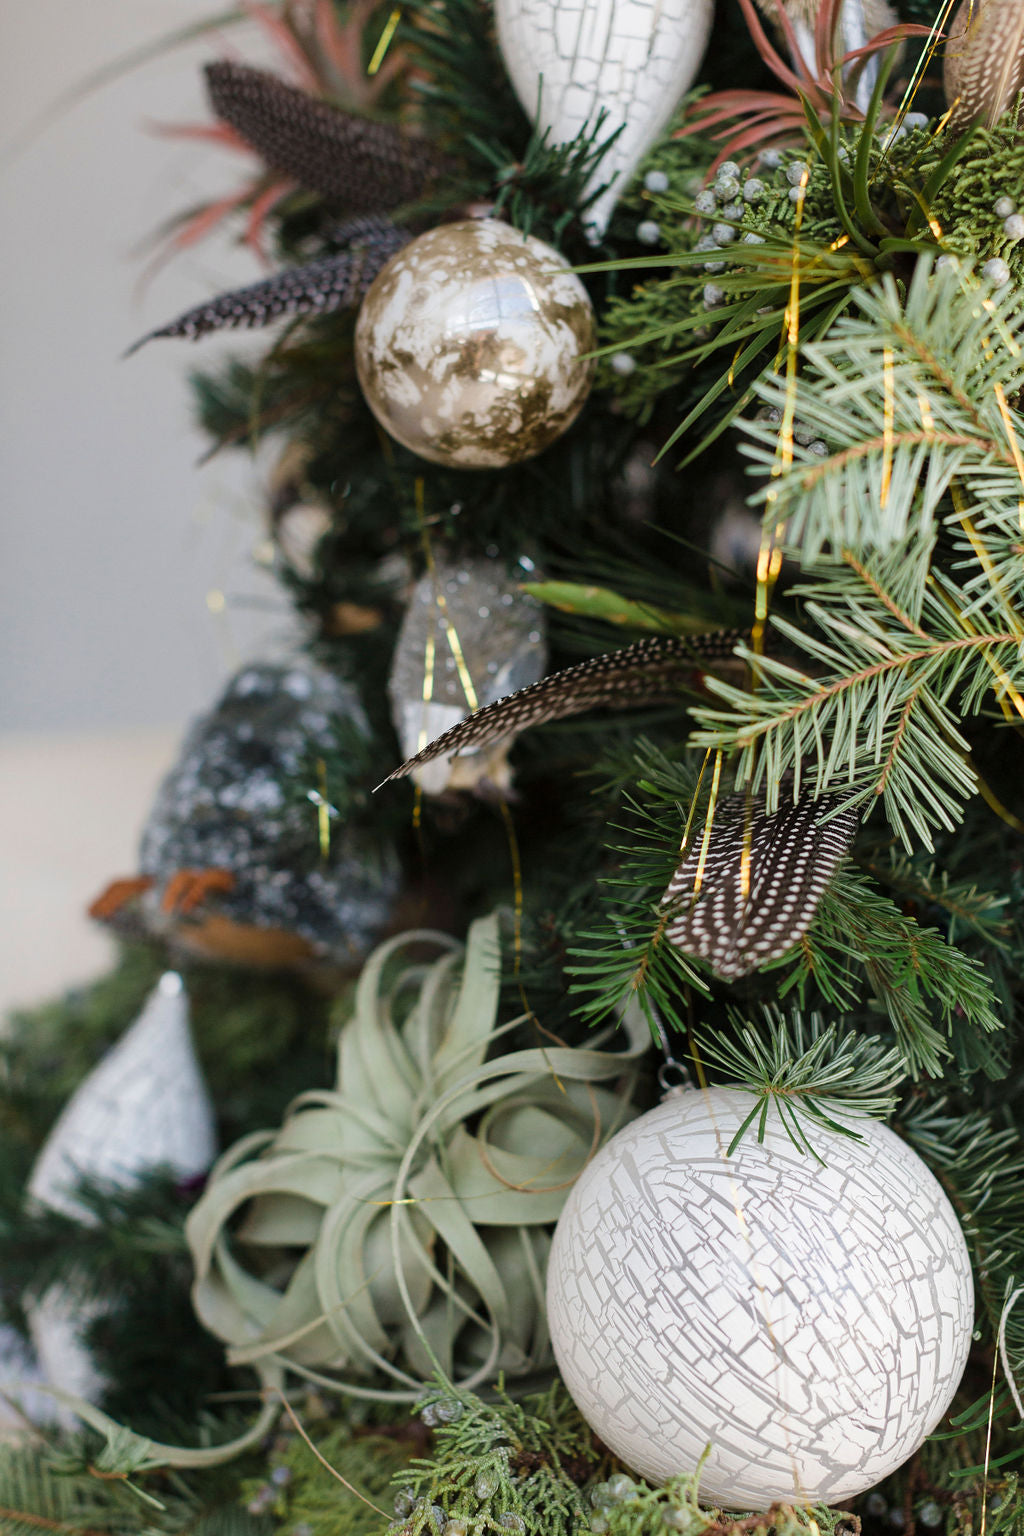 Tips to spice up your Christmas decor